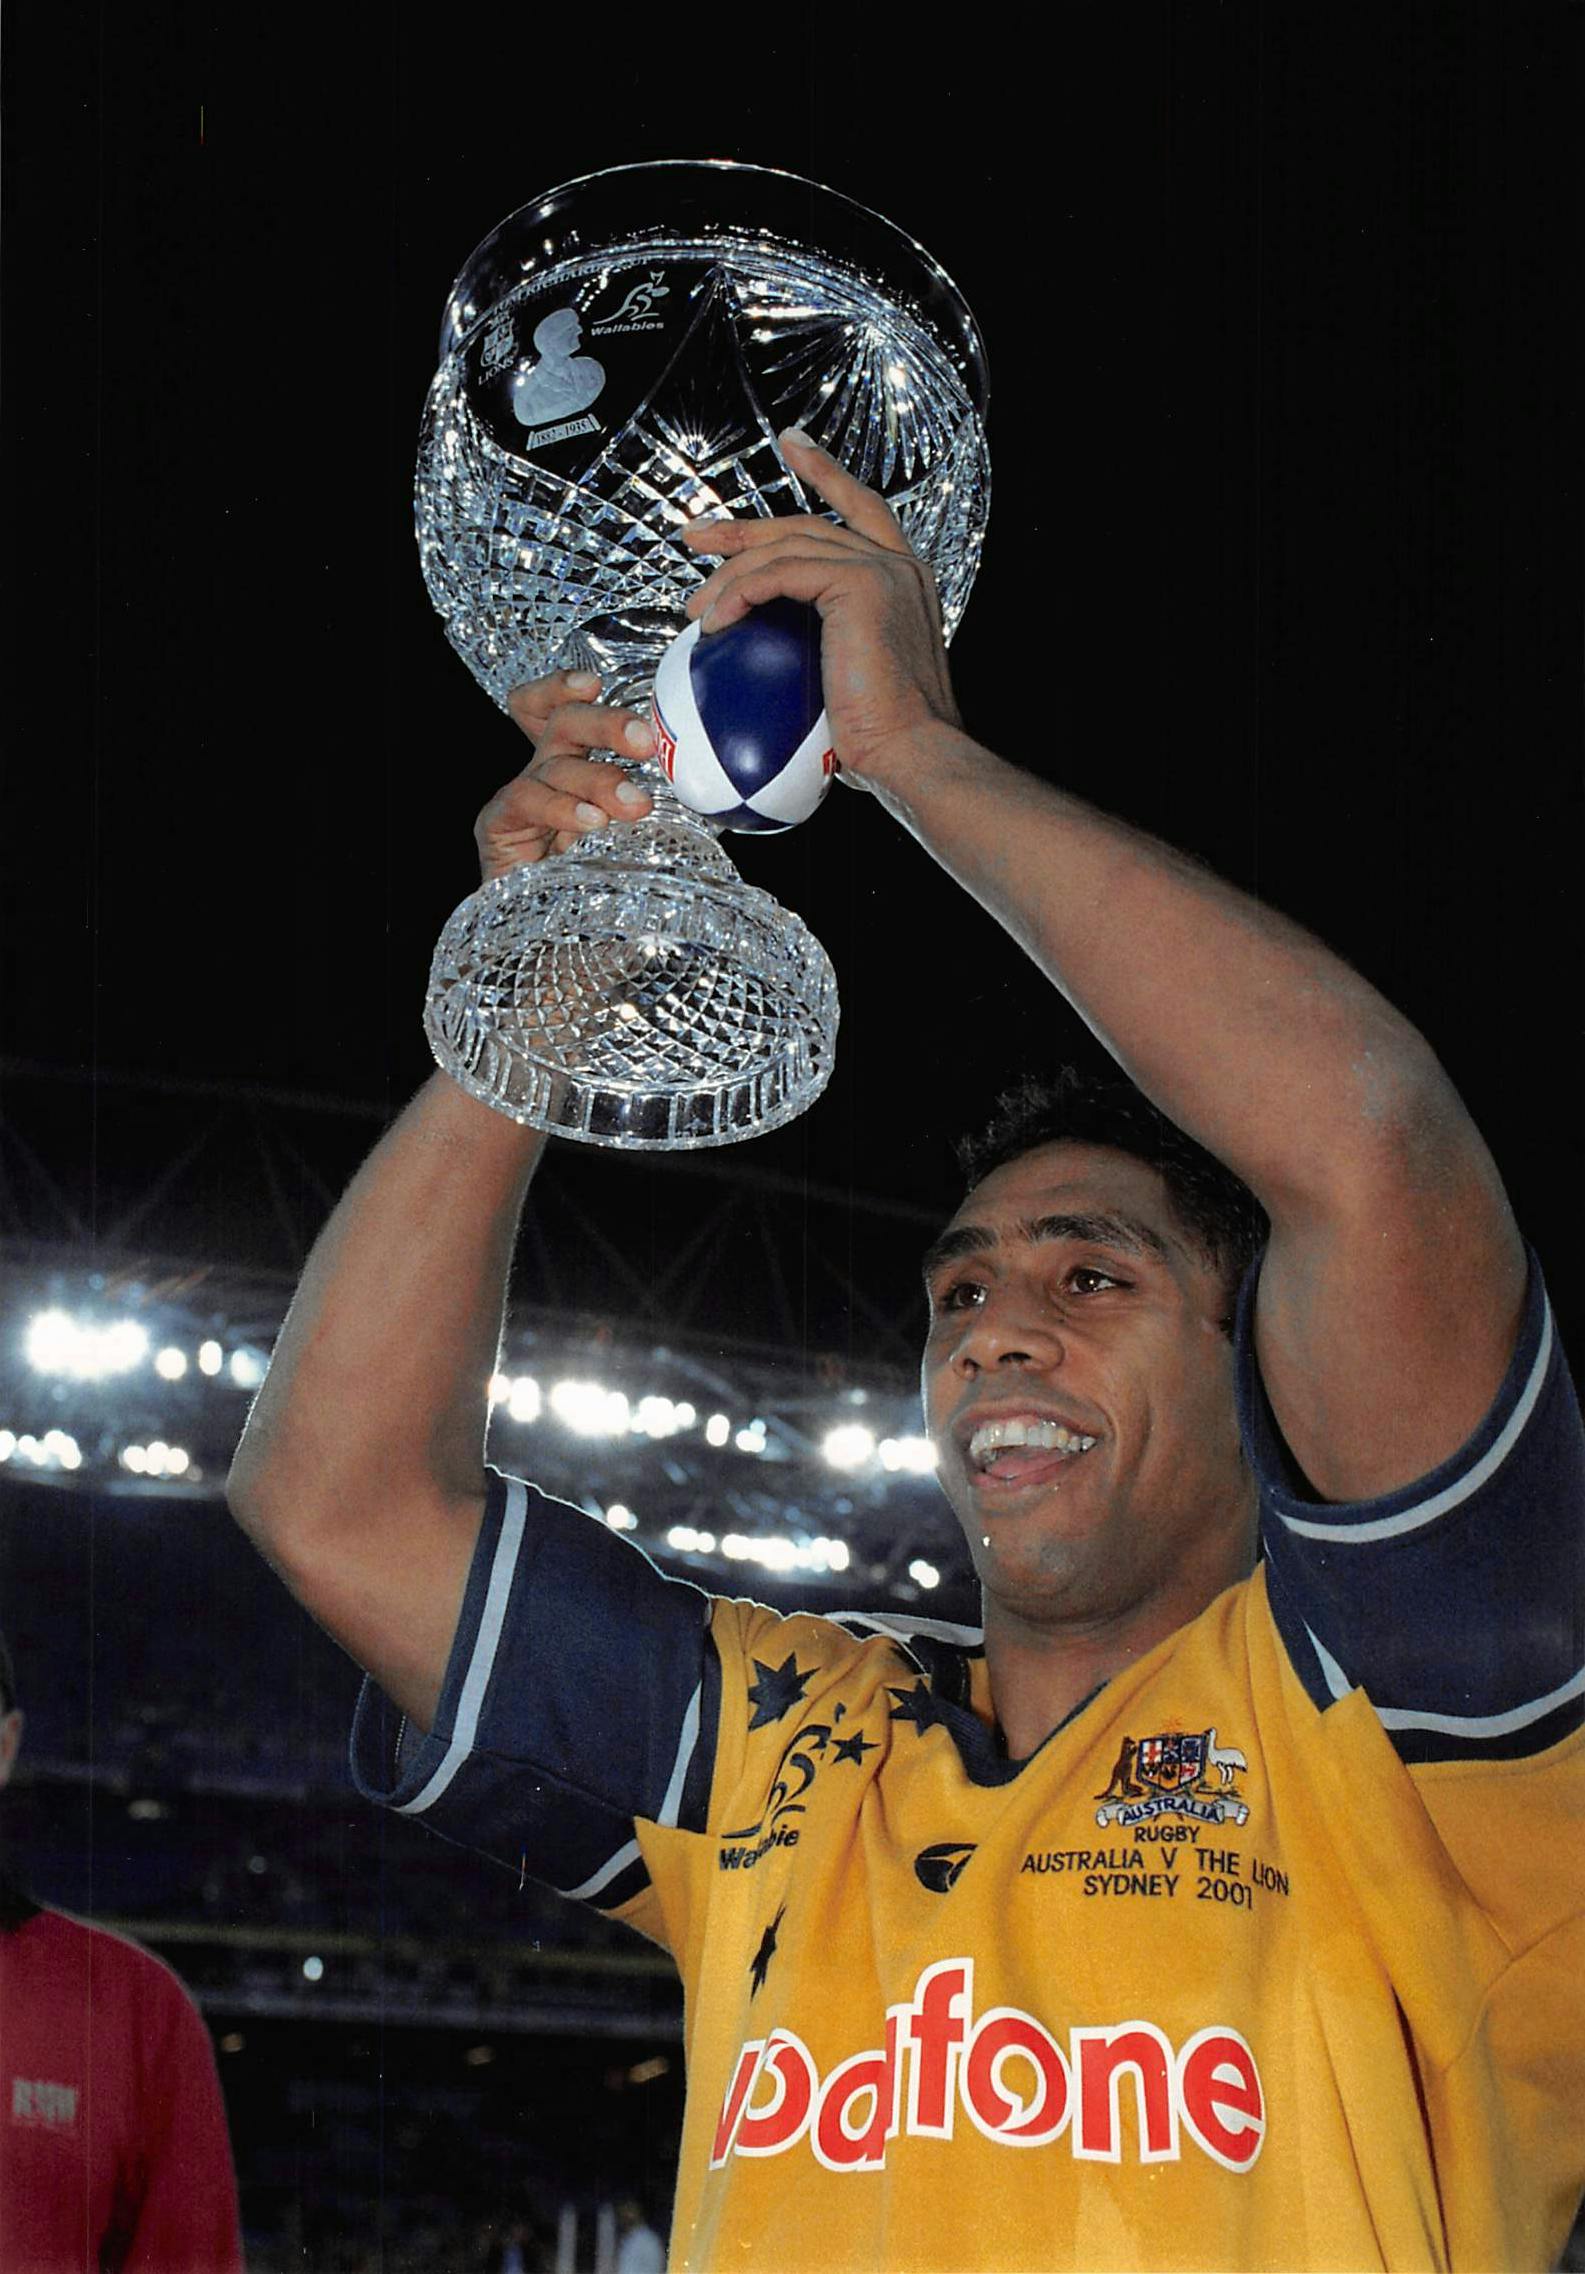 Action shot - Andrew Walker holds up the Tom Richards Cup after Australia wins 3rd Test and series v British & Irish Lions Stadium Australia